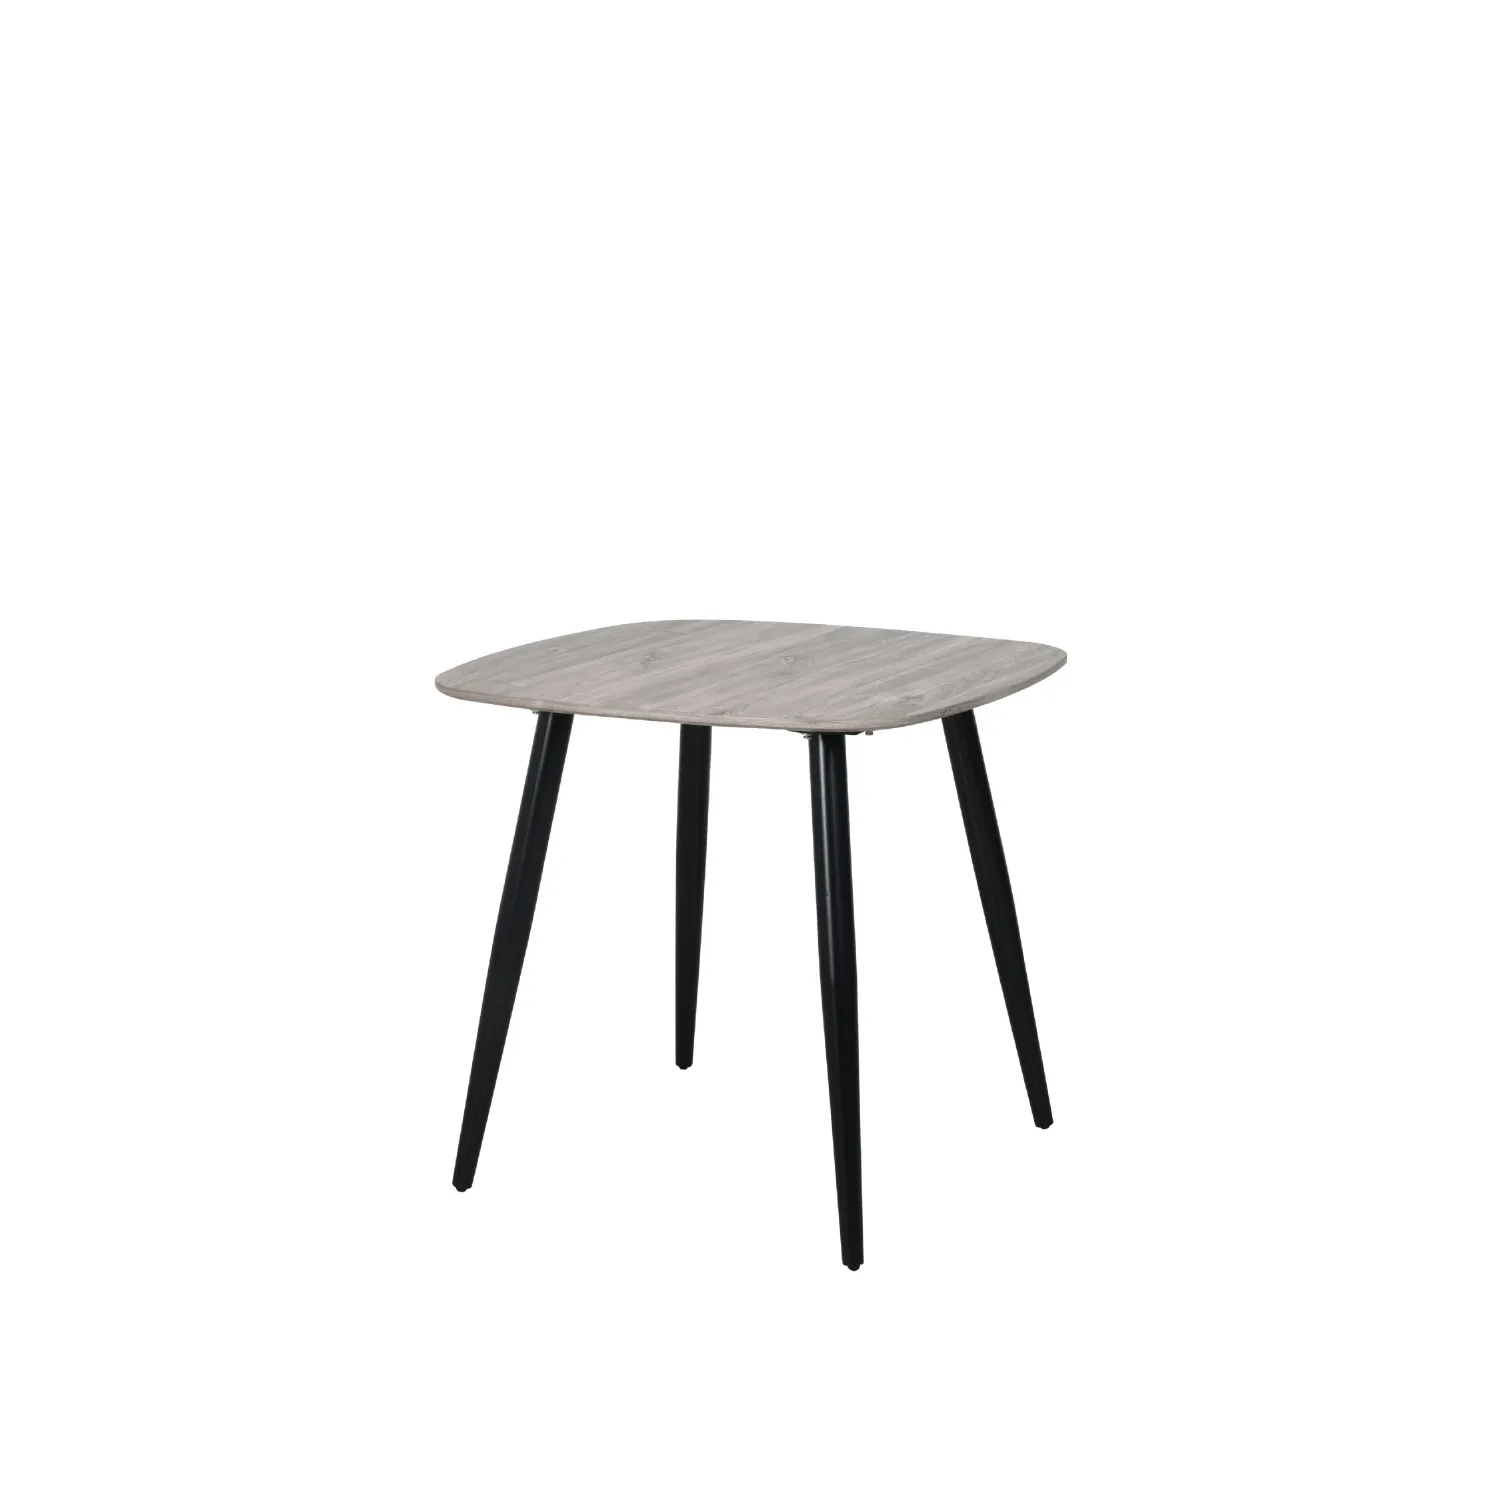 Grey Oak Effect Small Square Dining Table Black Tapered Legs